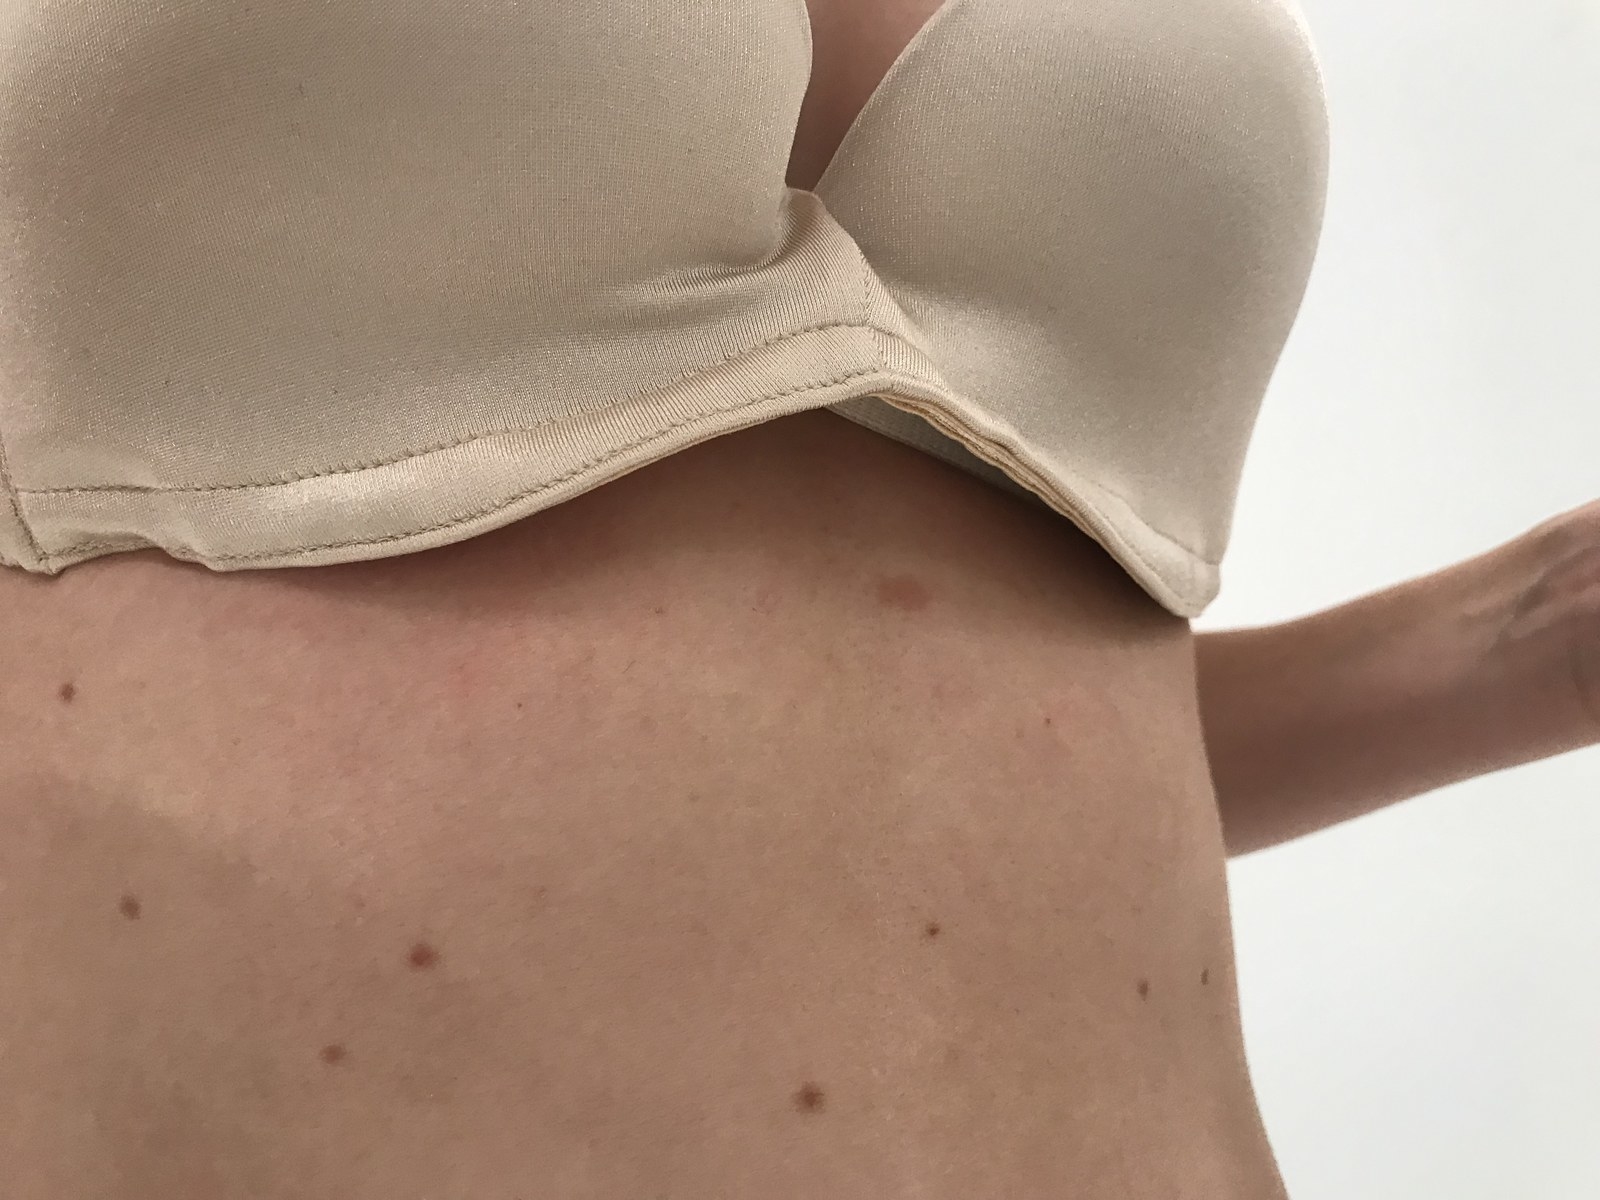 7 pretty bras for small breasts that aren't push-up bras